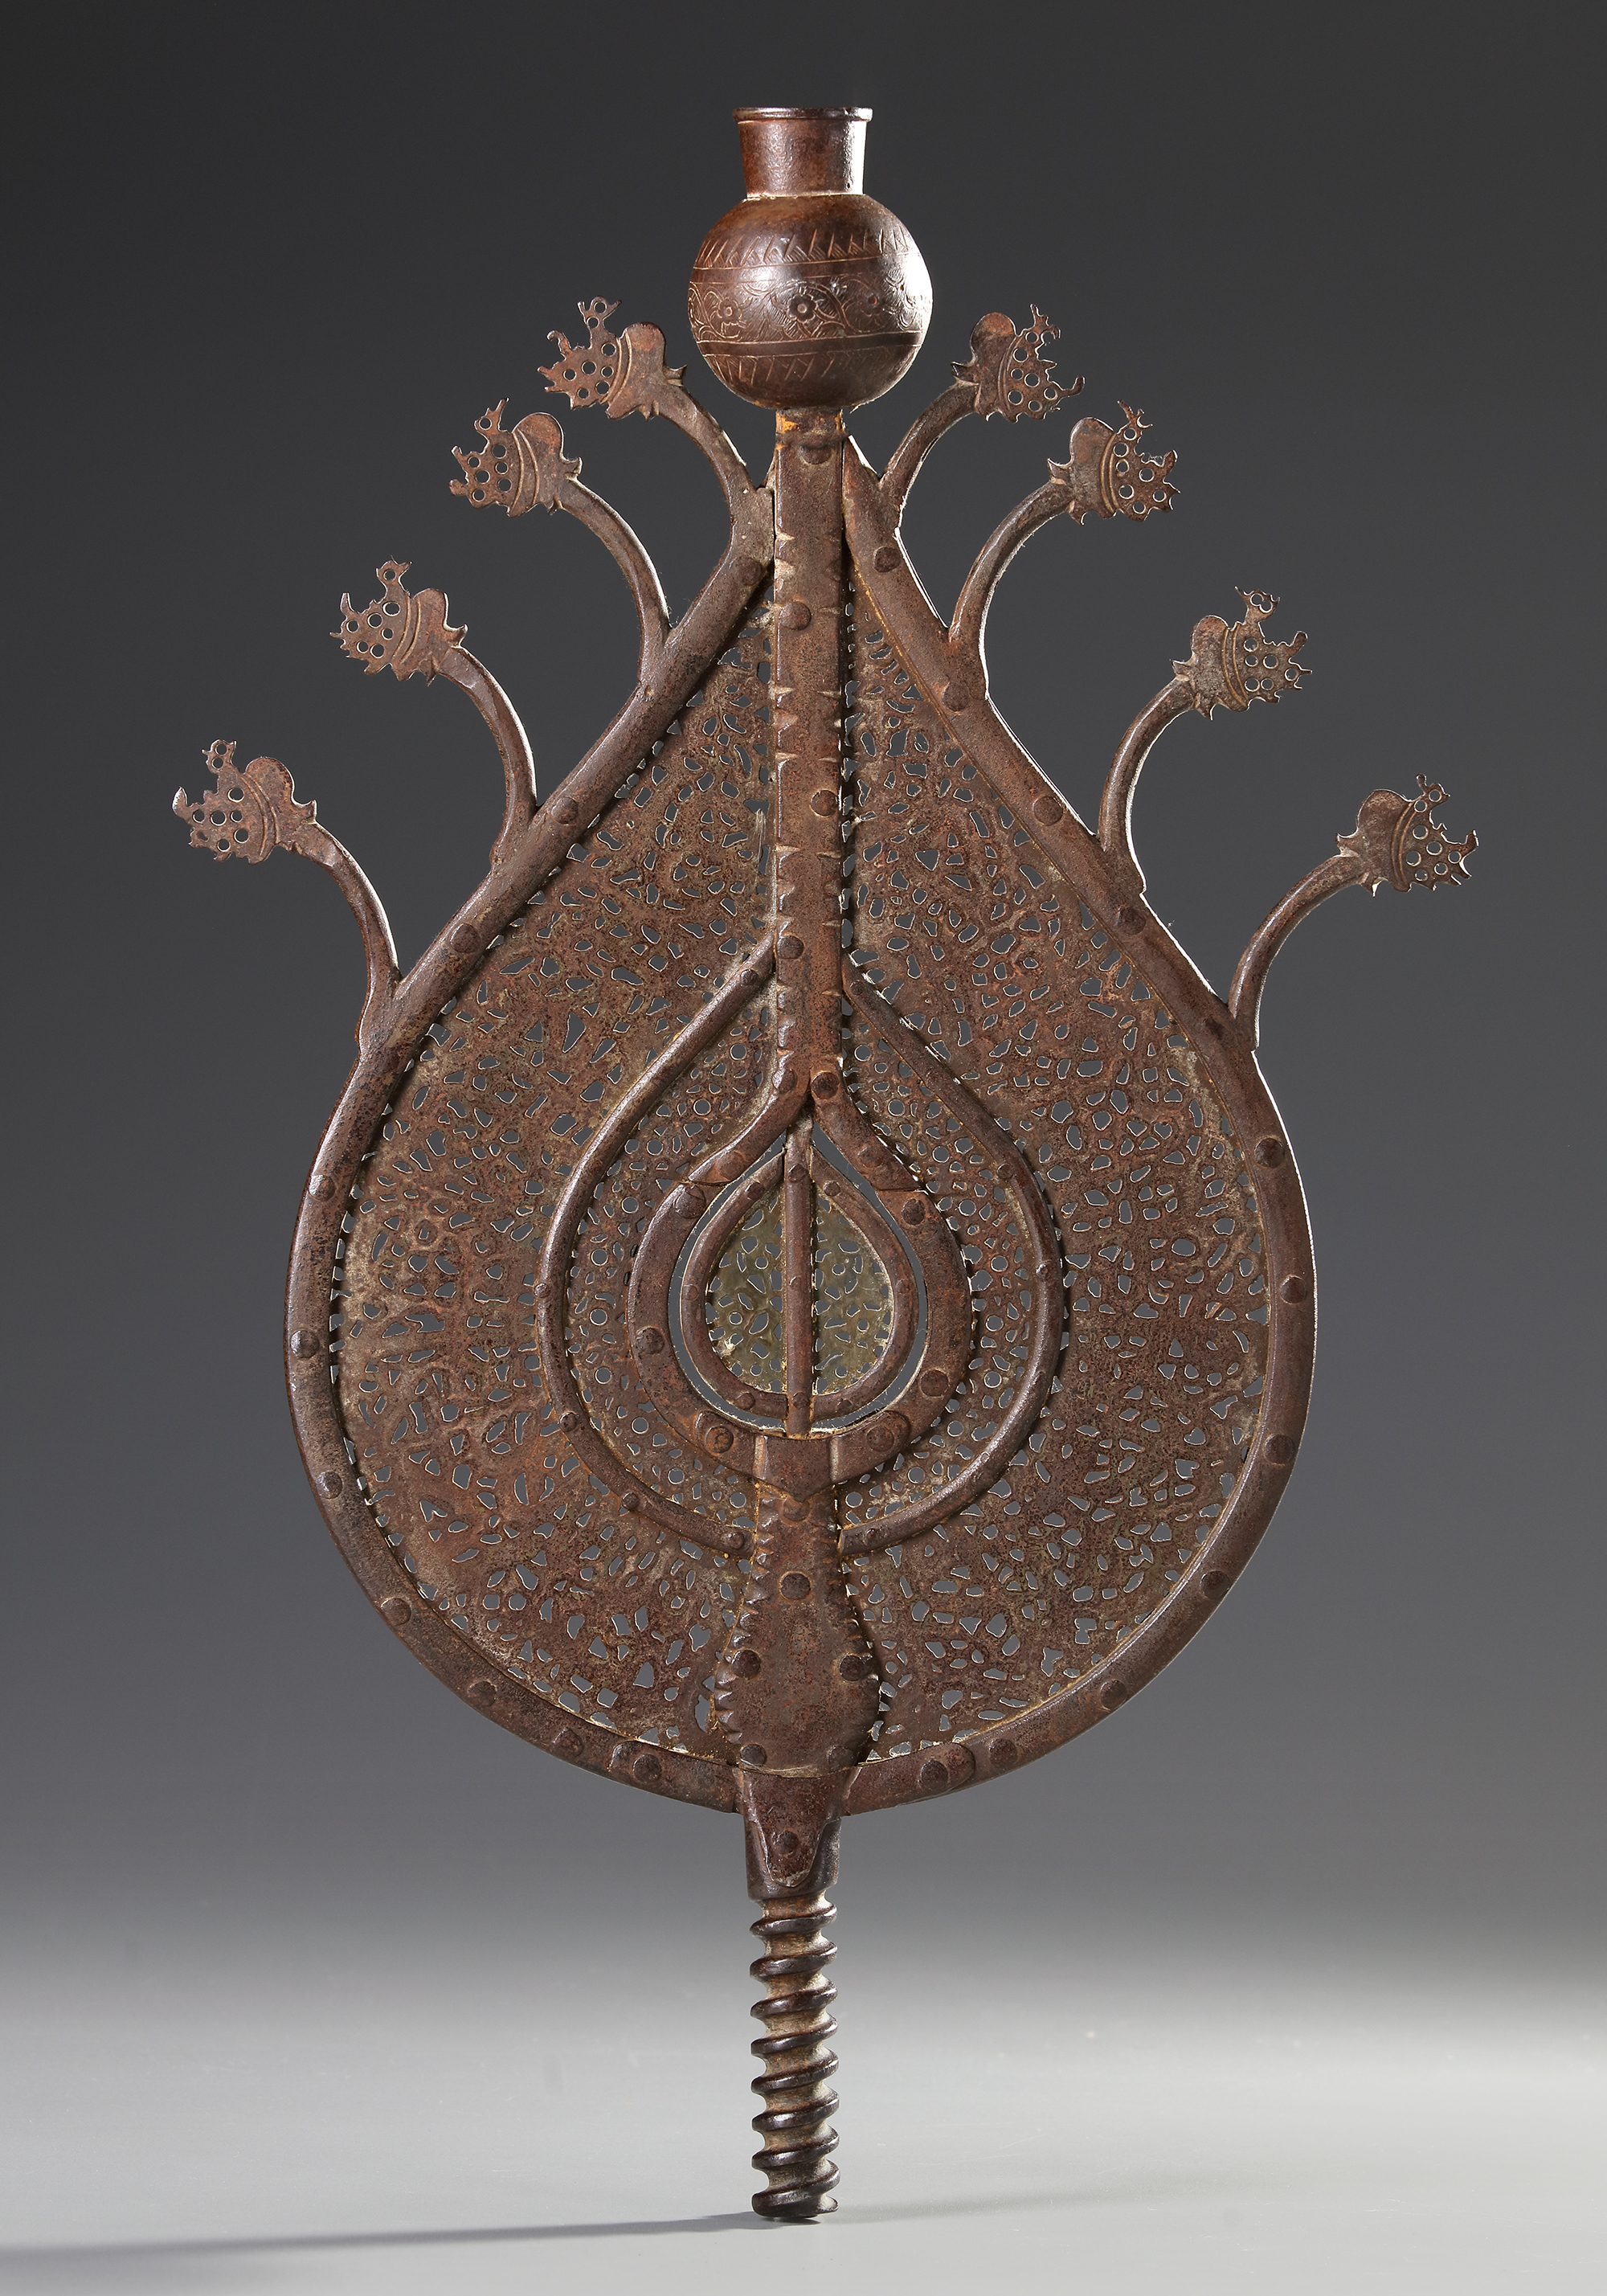 AN EARLY SAFAVID PIERCED BRONZE PROCESSIONAL STANDARD (ALAM), PERSIA, DATED 924 AH/1518 AD - Image 3 of 4